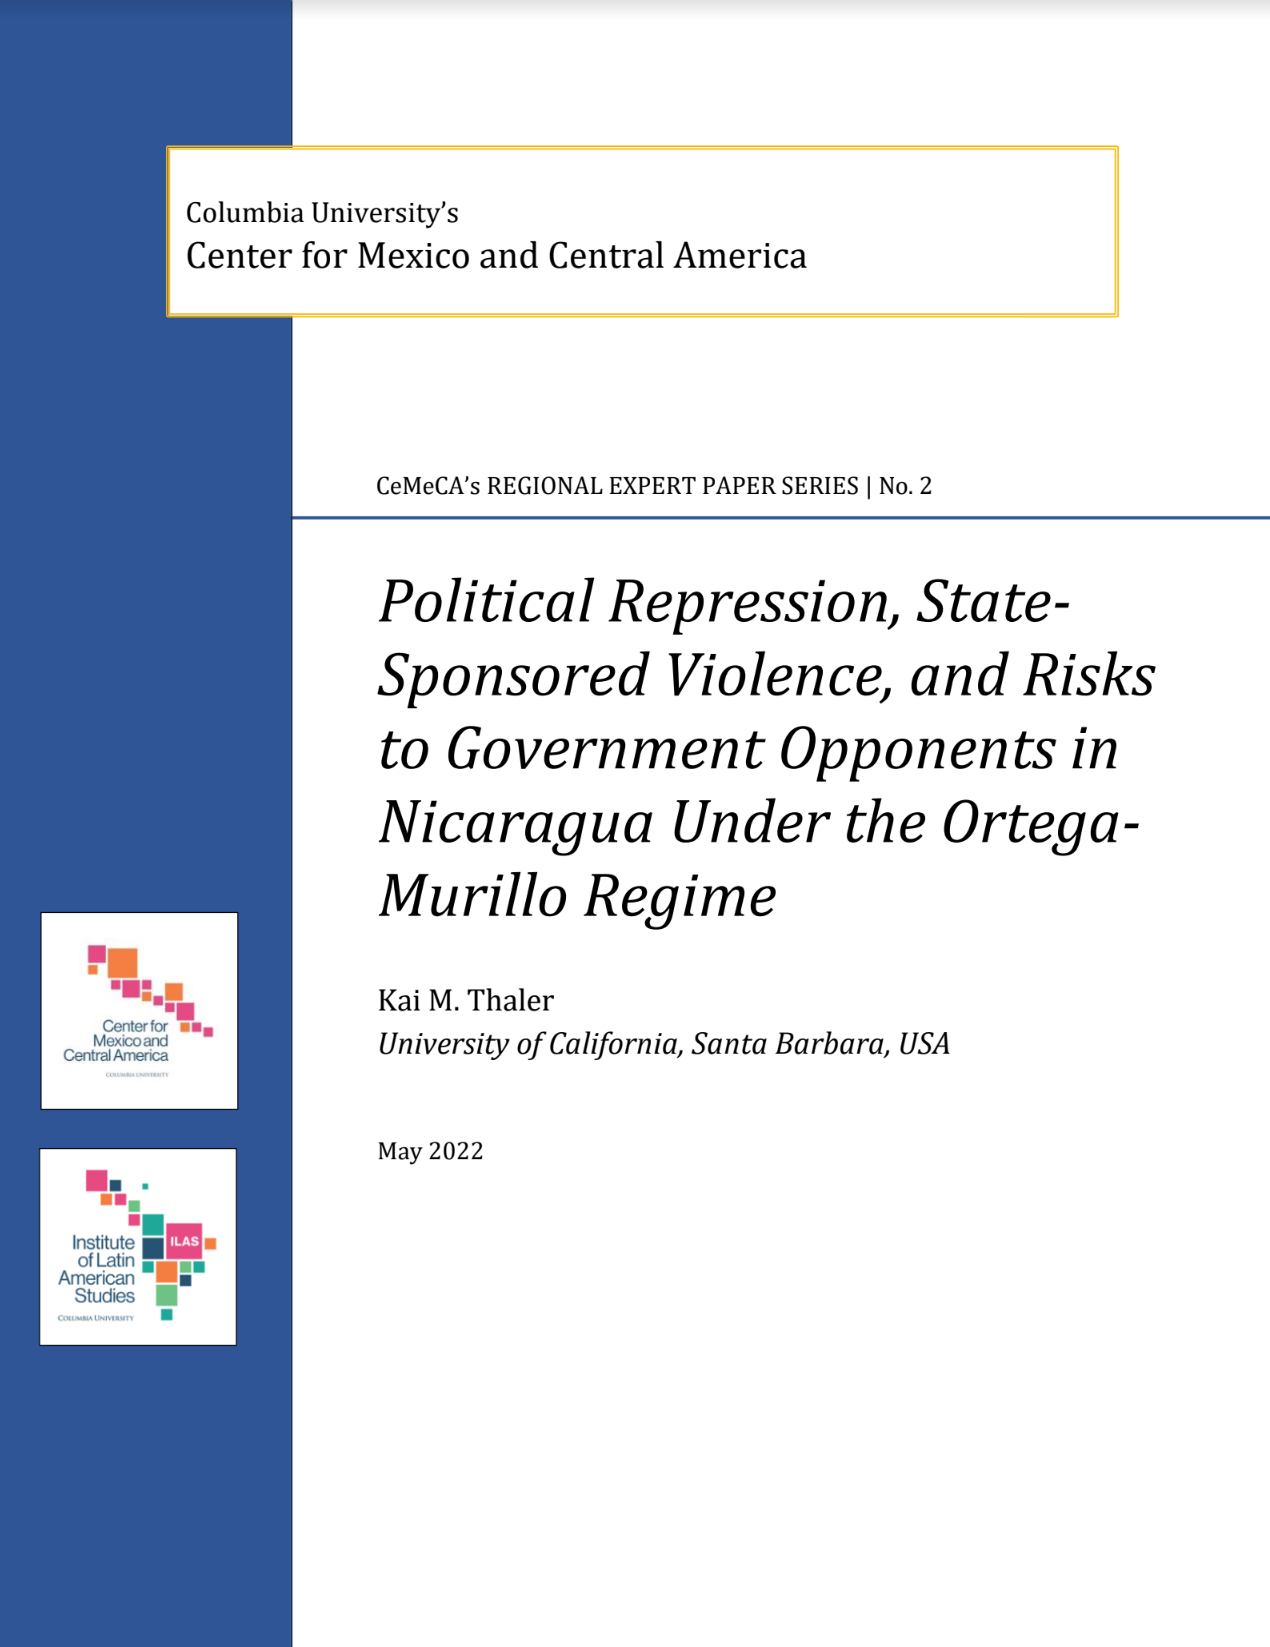 Cover: Political Repression, State-Sponsored Violence, and Risks to Government Opponents in Nicaragua Under the Ortega- Murillo Regime